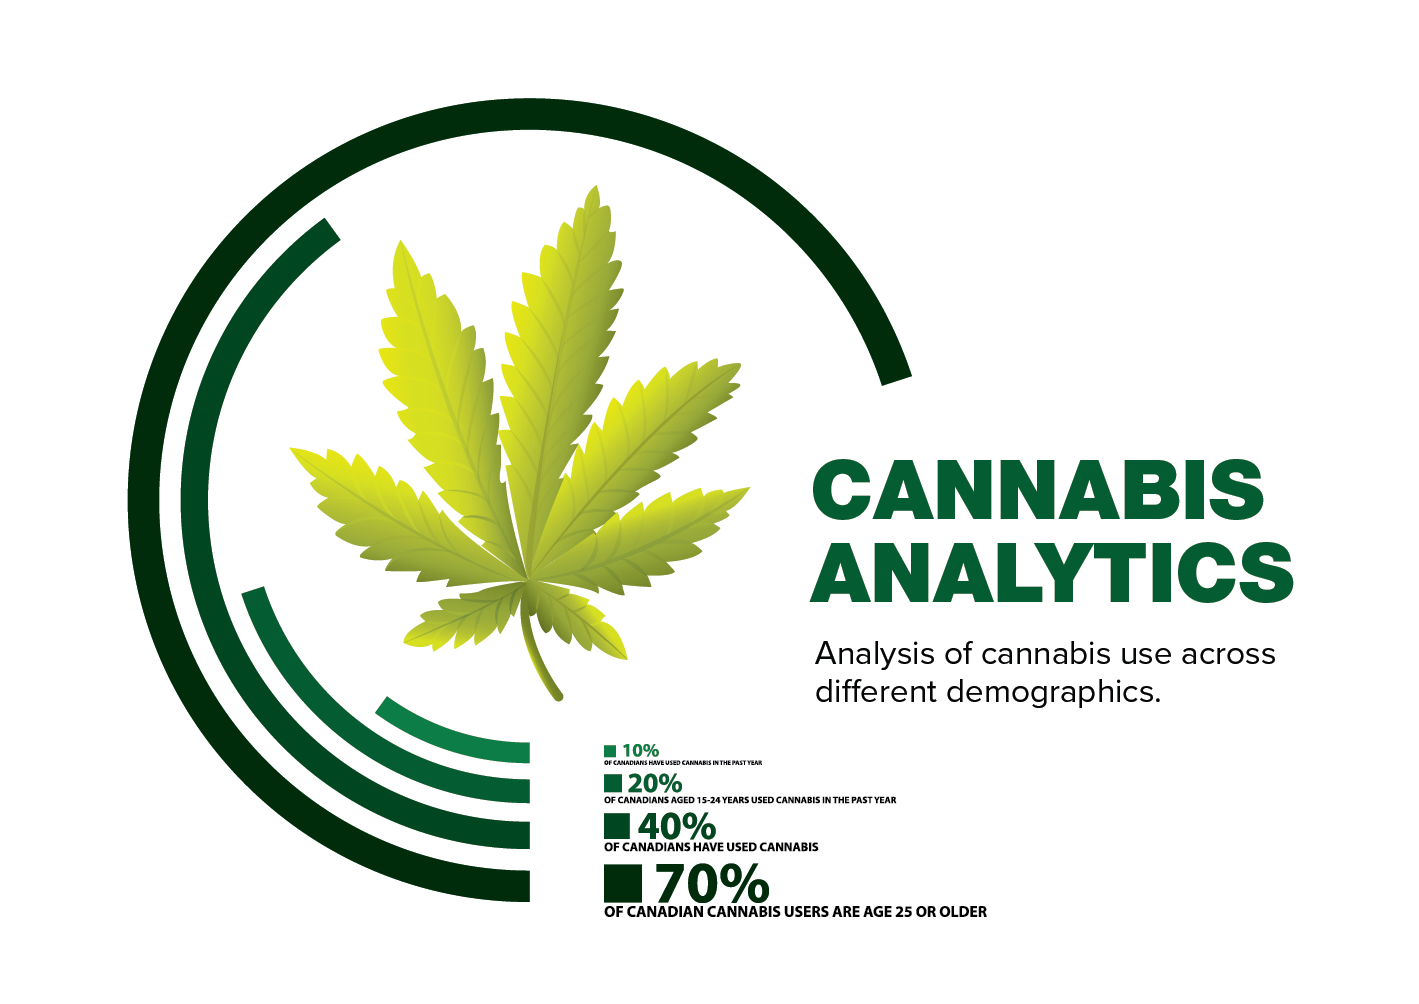 How to Use Data to Become a Cannabis Industry Leader